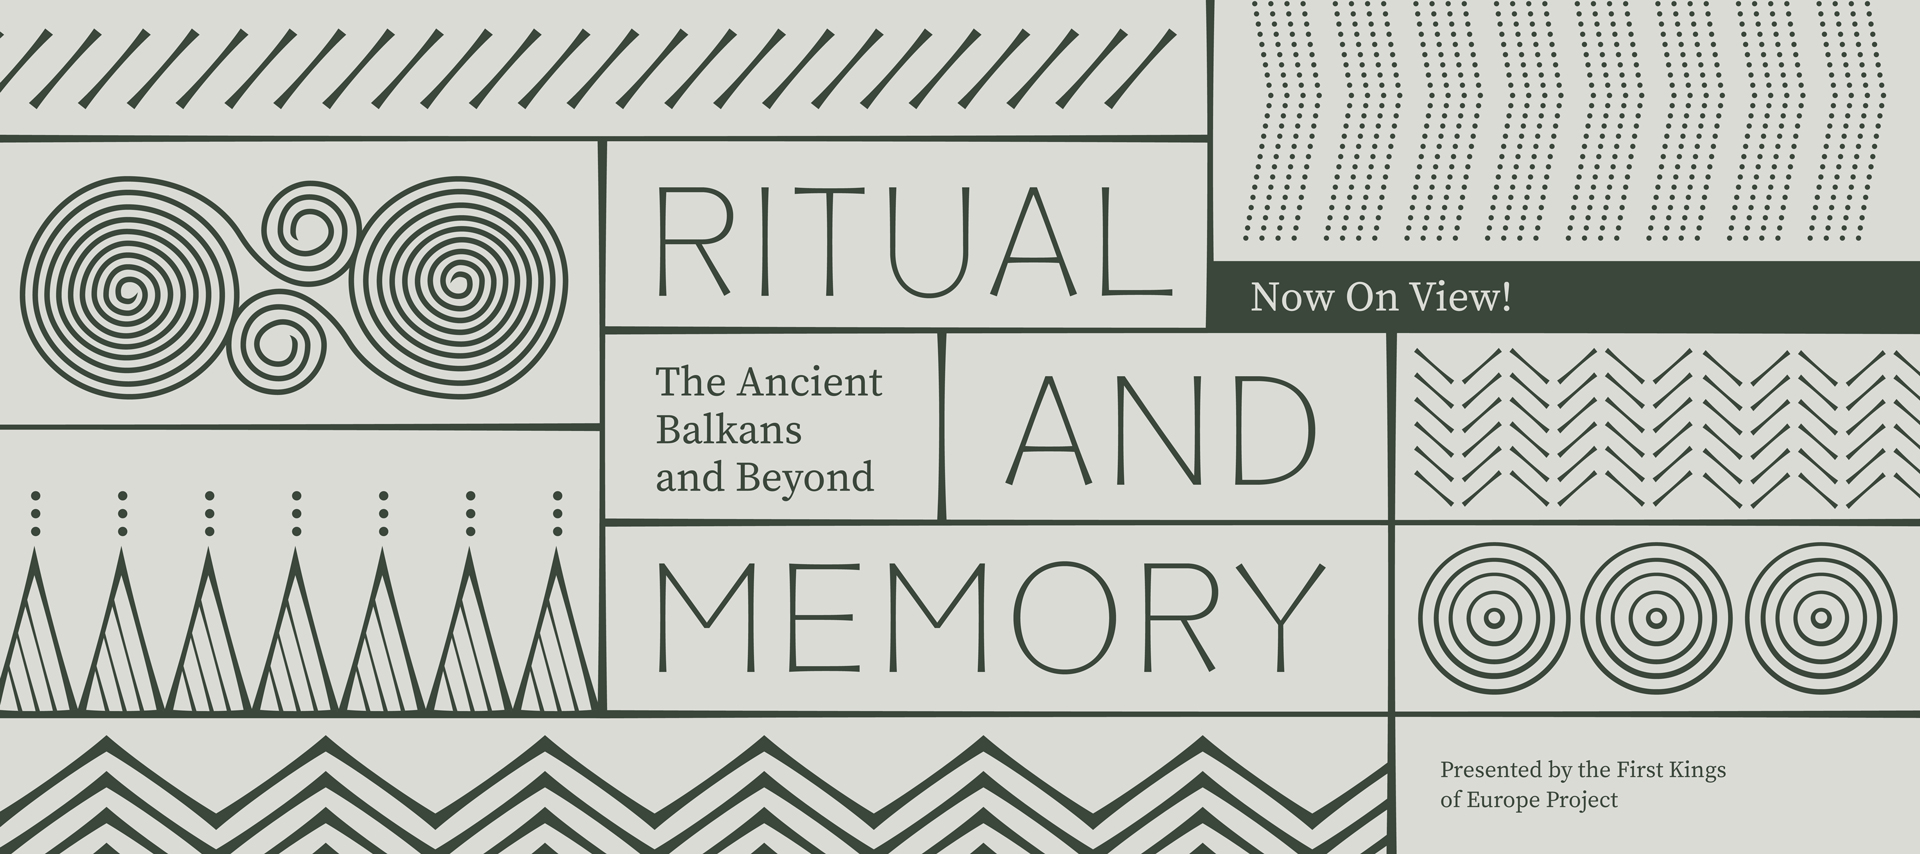 Ritual and Memory, the ancient balkans and beyond, now open!